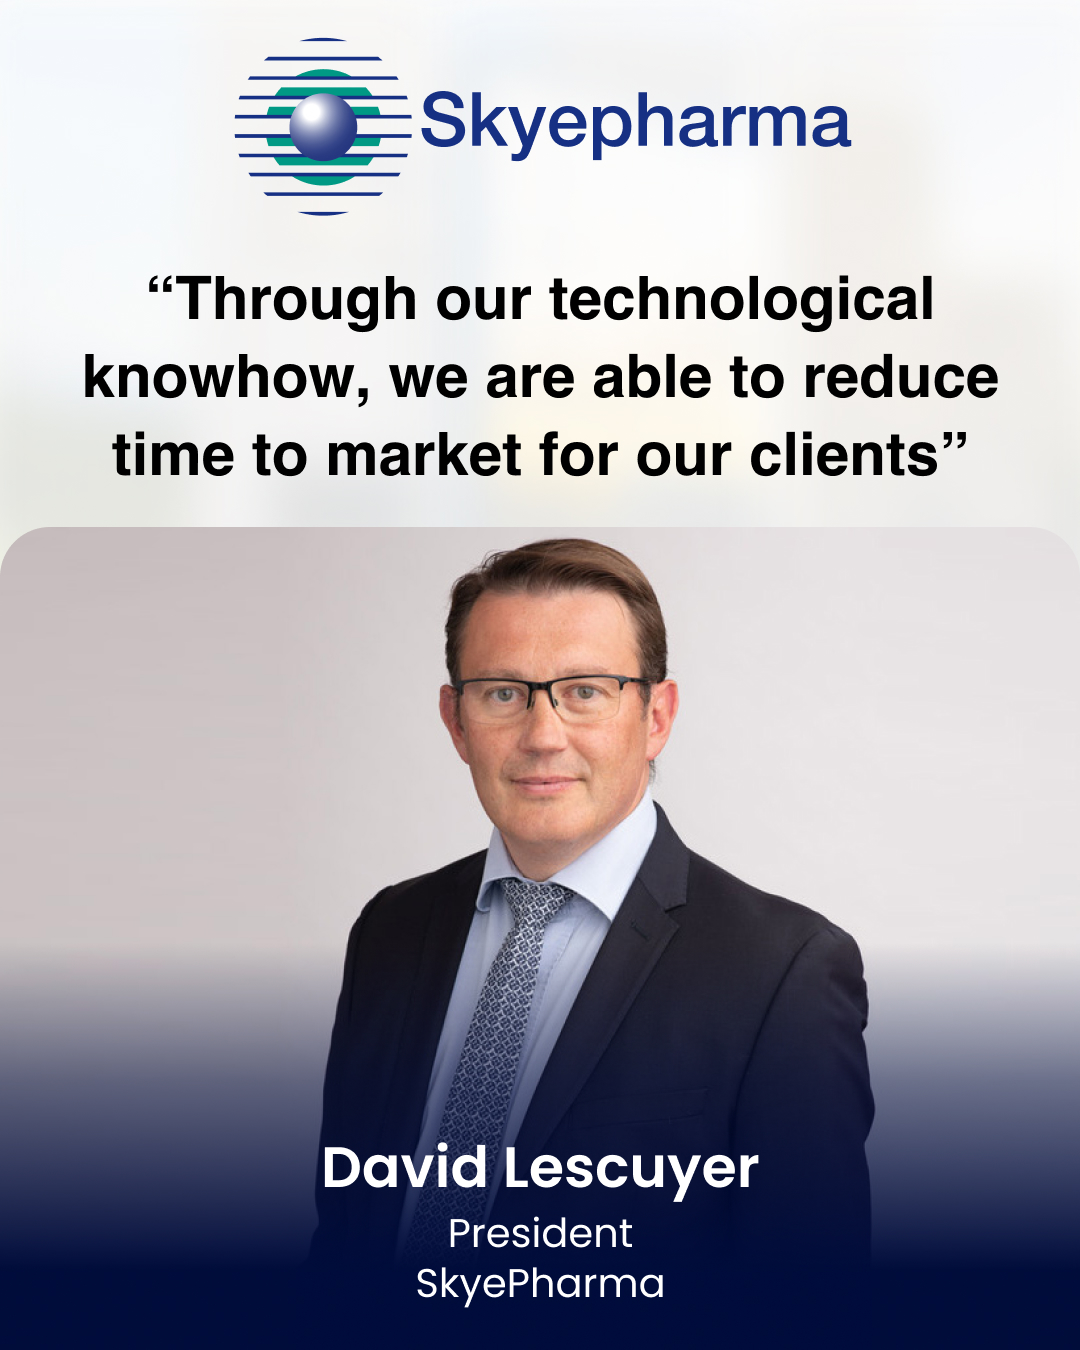 “Through our technological knowhow, we are able to reduce time to market for our clients”